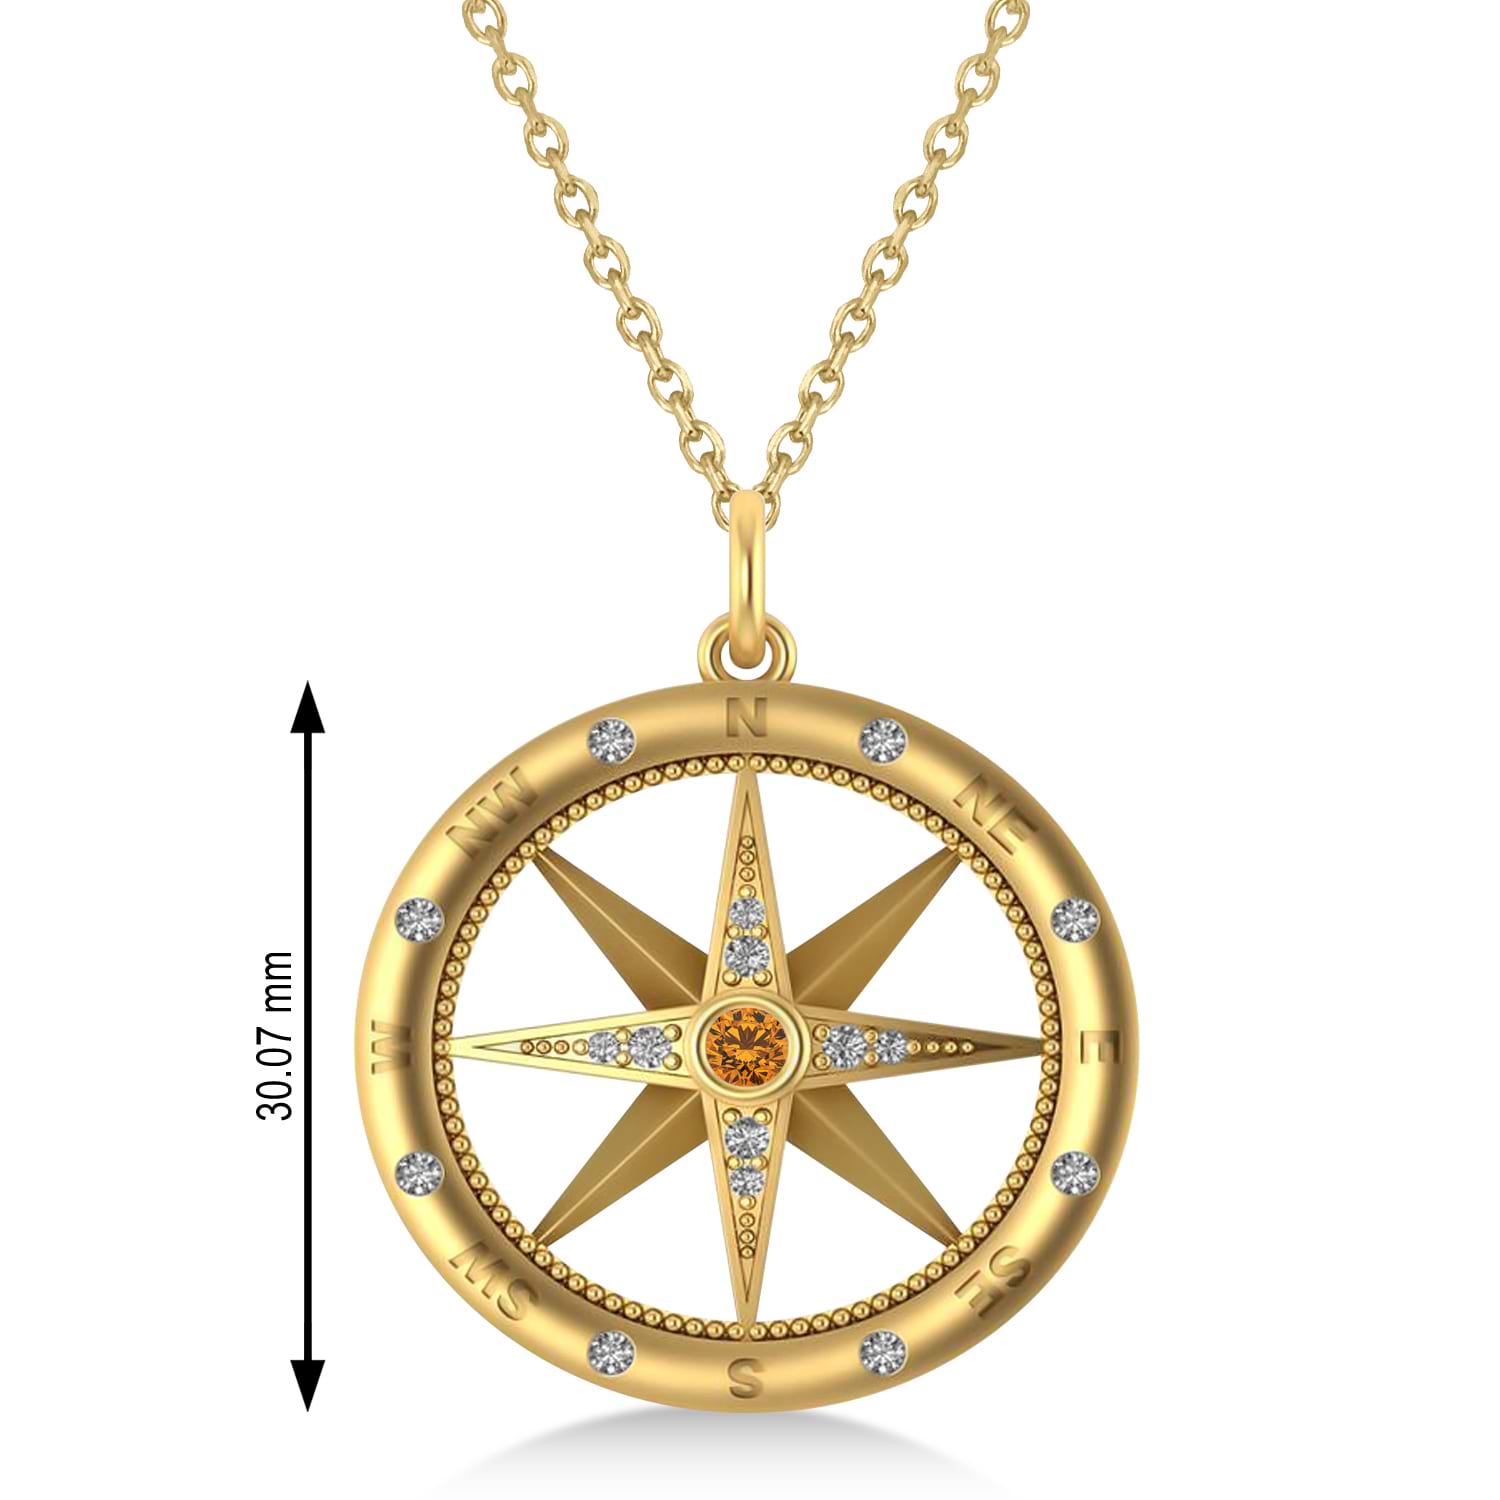 Large Compass Pendant For Men Citrine & Diamond Accented 14k Yellow Gold (0.38ct)